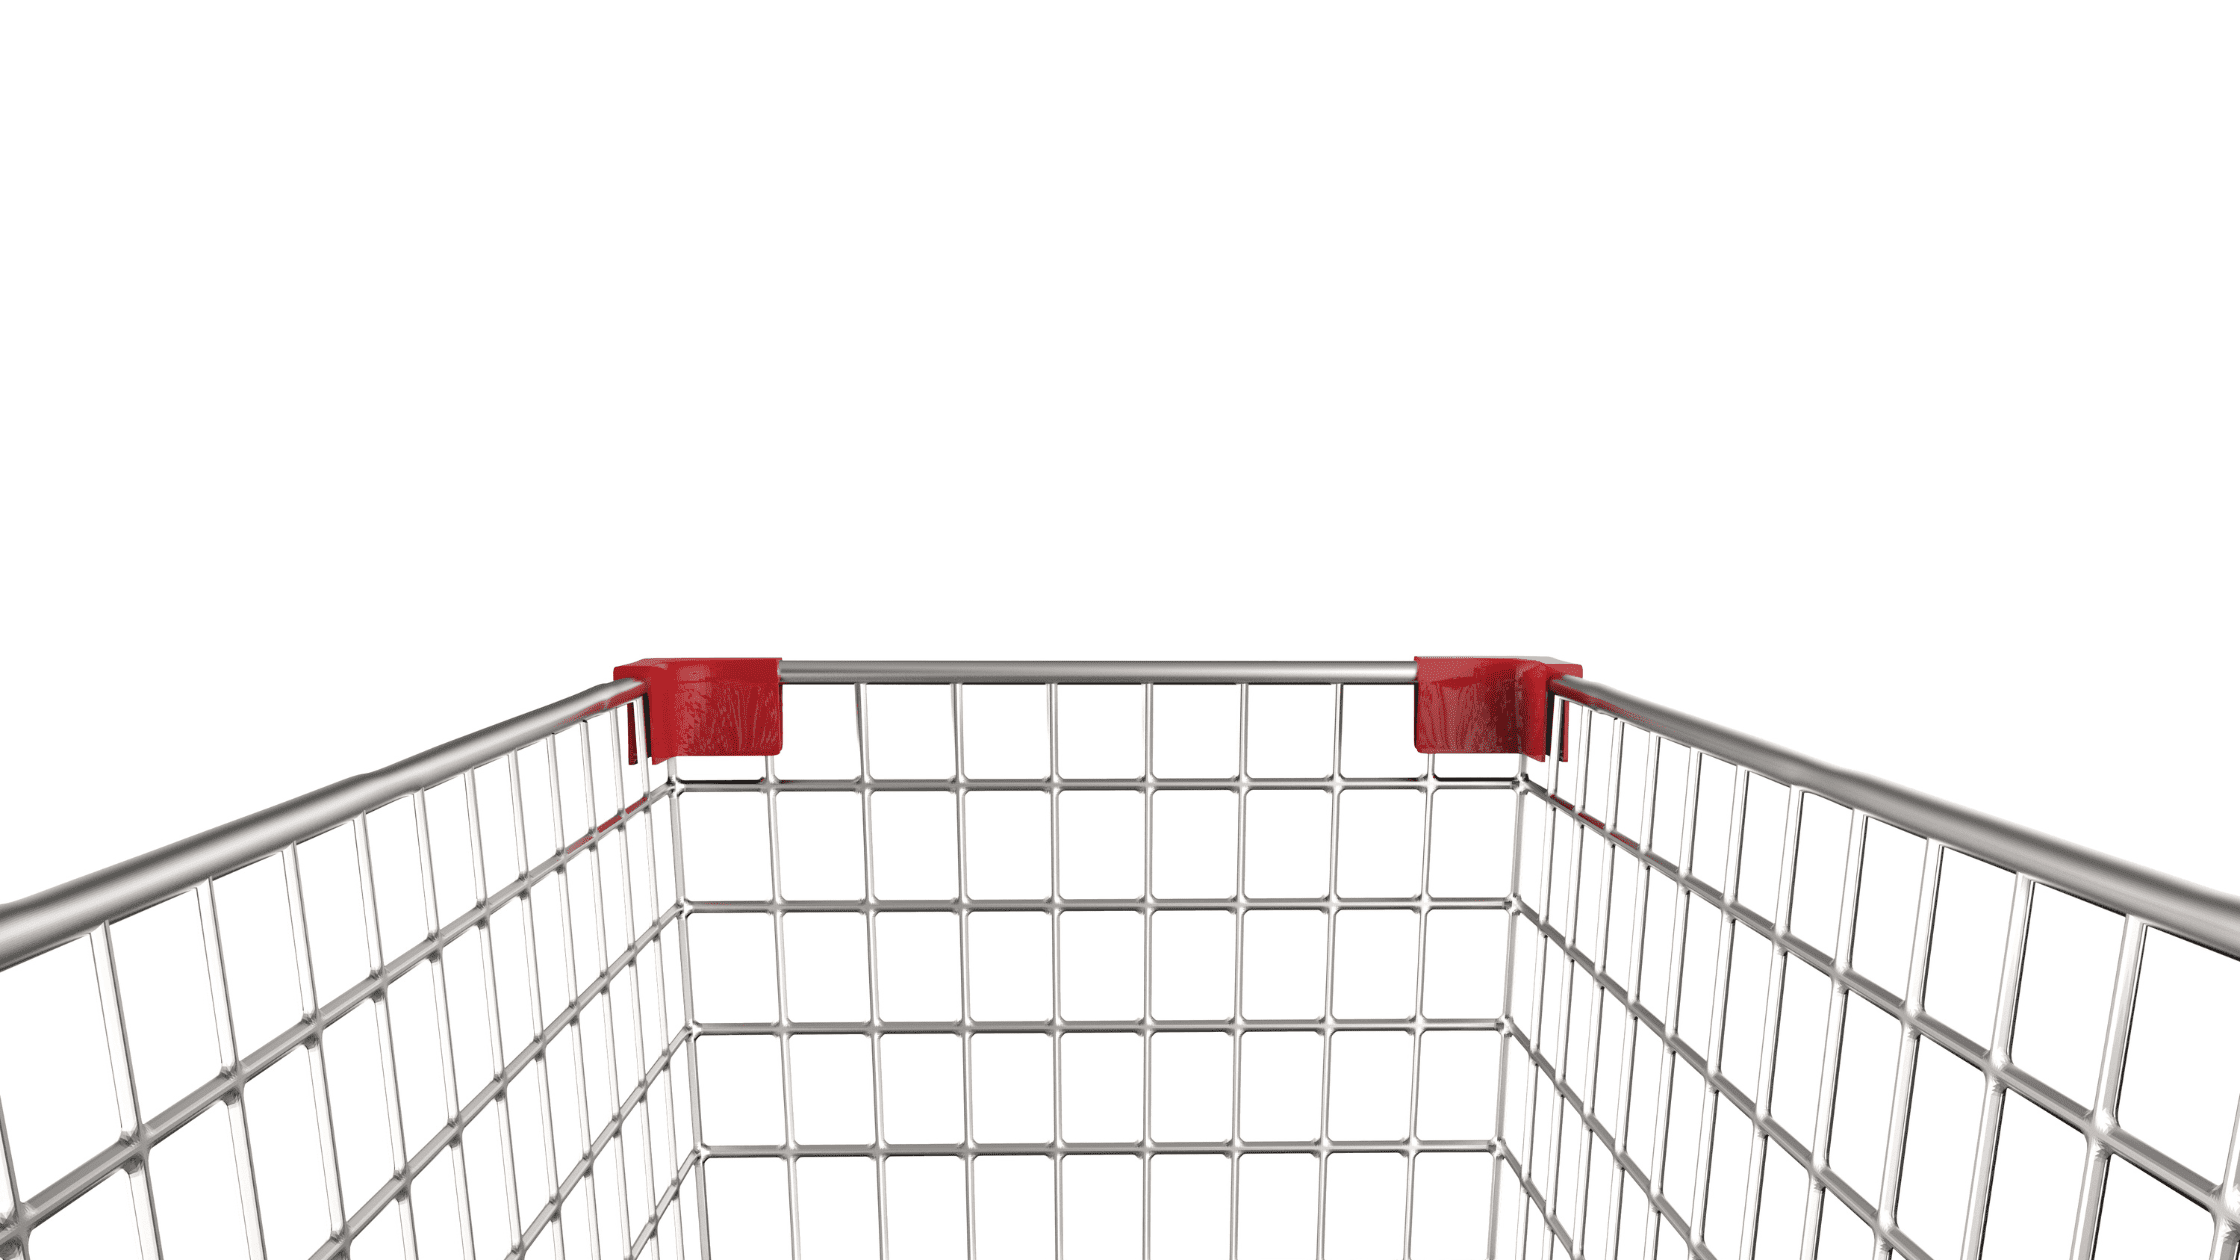 View of shopping cart in a store